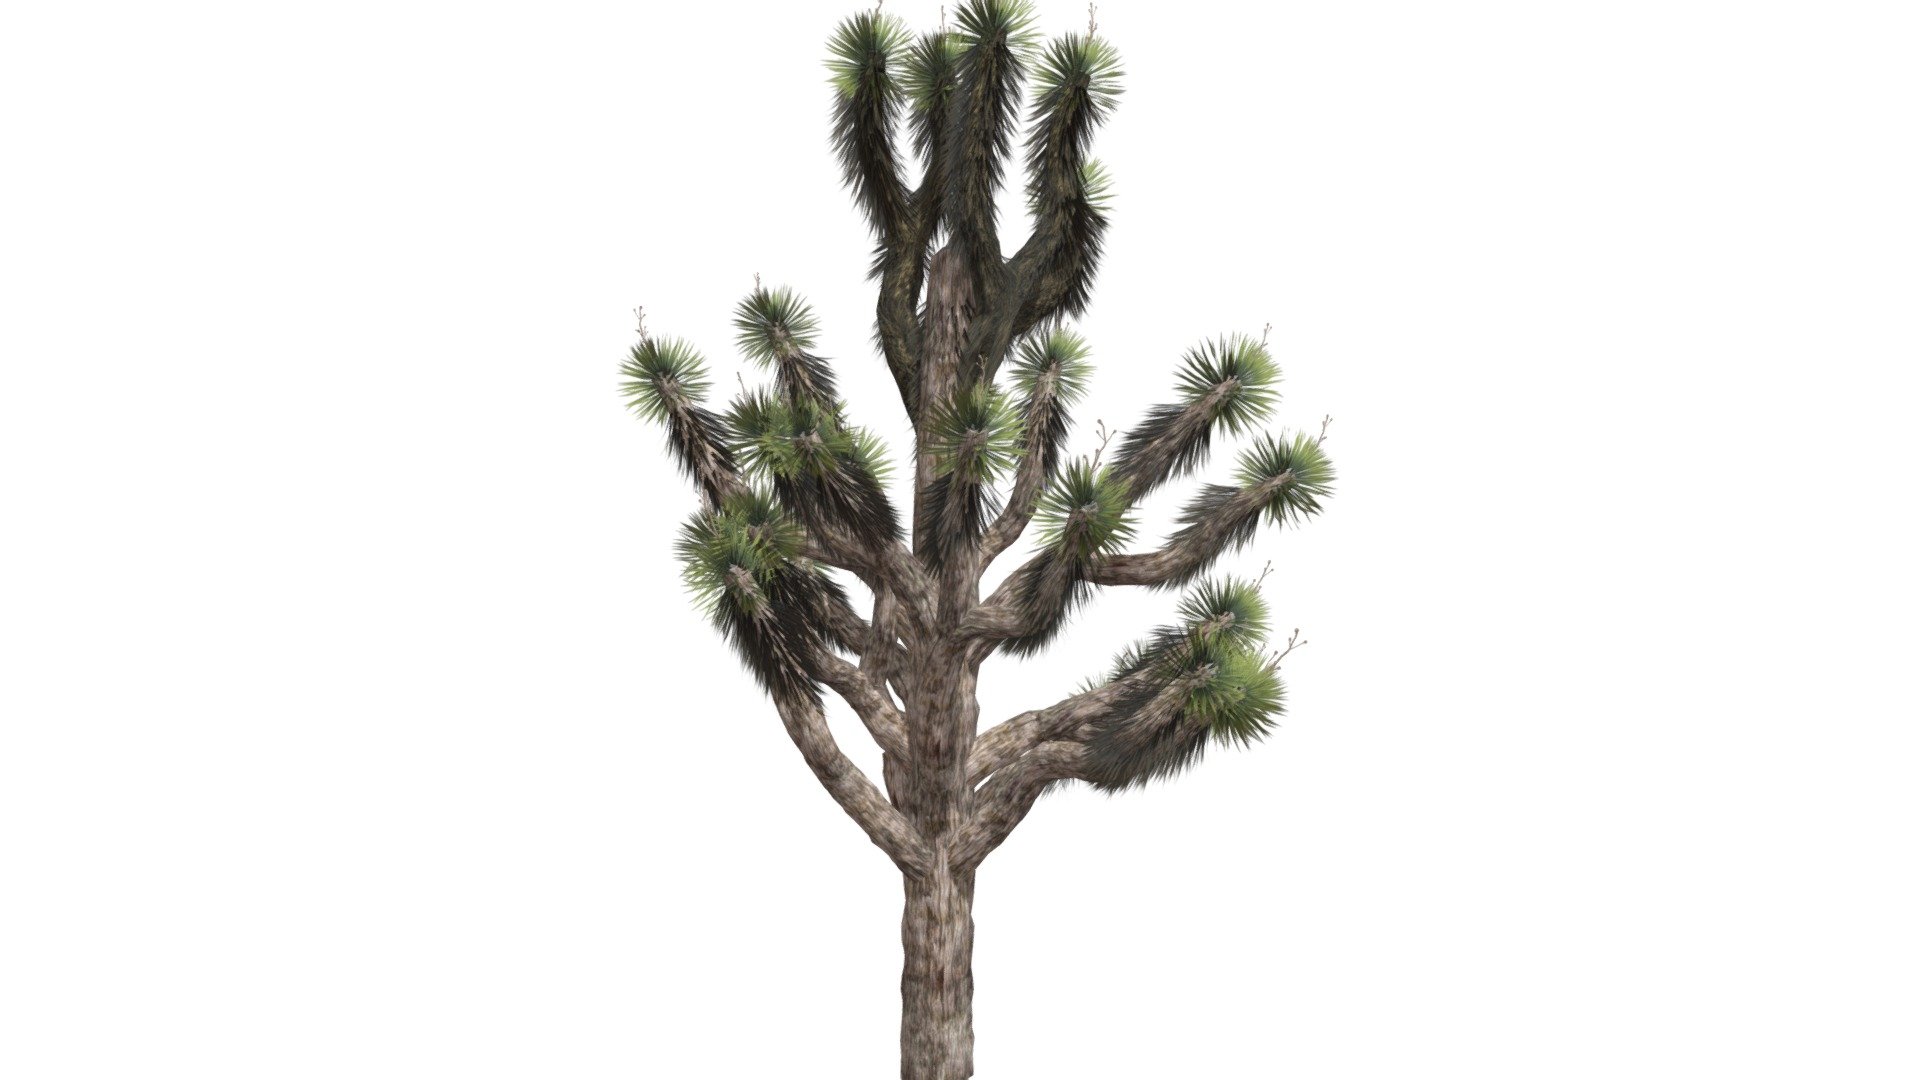 This 3D model of the Joshua Tree is a highly detailed and photorealistic option suitable for architectural, landscaping, and video game projects. The model is designed with carefully crafted textures that mimic the natural beauty of a real Joshua Tree. Its versatility allows it to bring a touch of realism to any project, whether it's a small architectural rendering or a large-scale landscape design. Additionally, the model is optimized for performance and features efficient UV mapping. This photorealistic 3D model is the perfect solution for architects, landscapers, and game developers who want to enhance the visual experience of their project with a highly detailed, photorealistic Joshua Tree 3d model